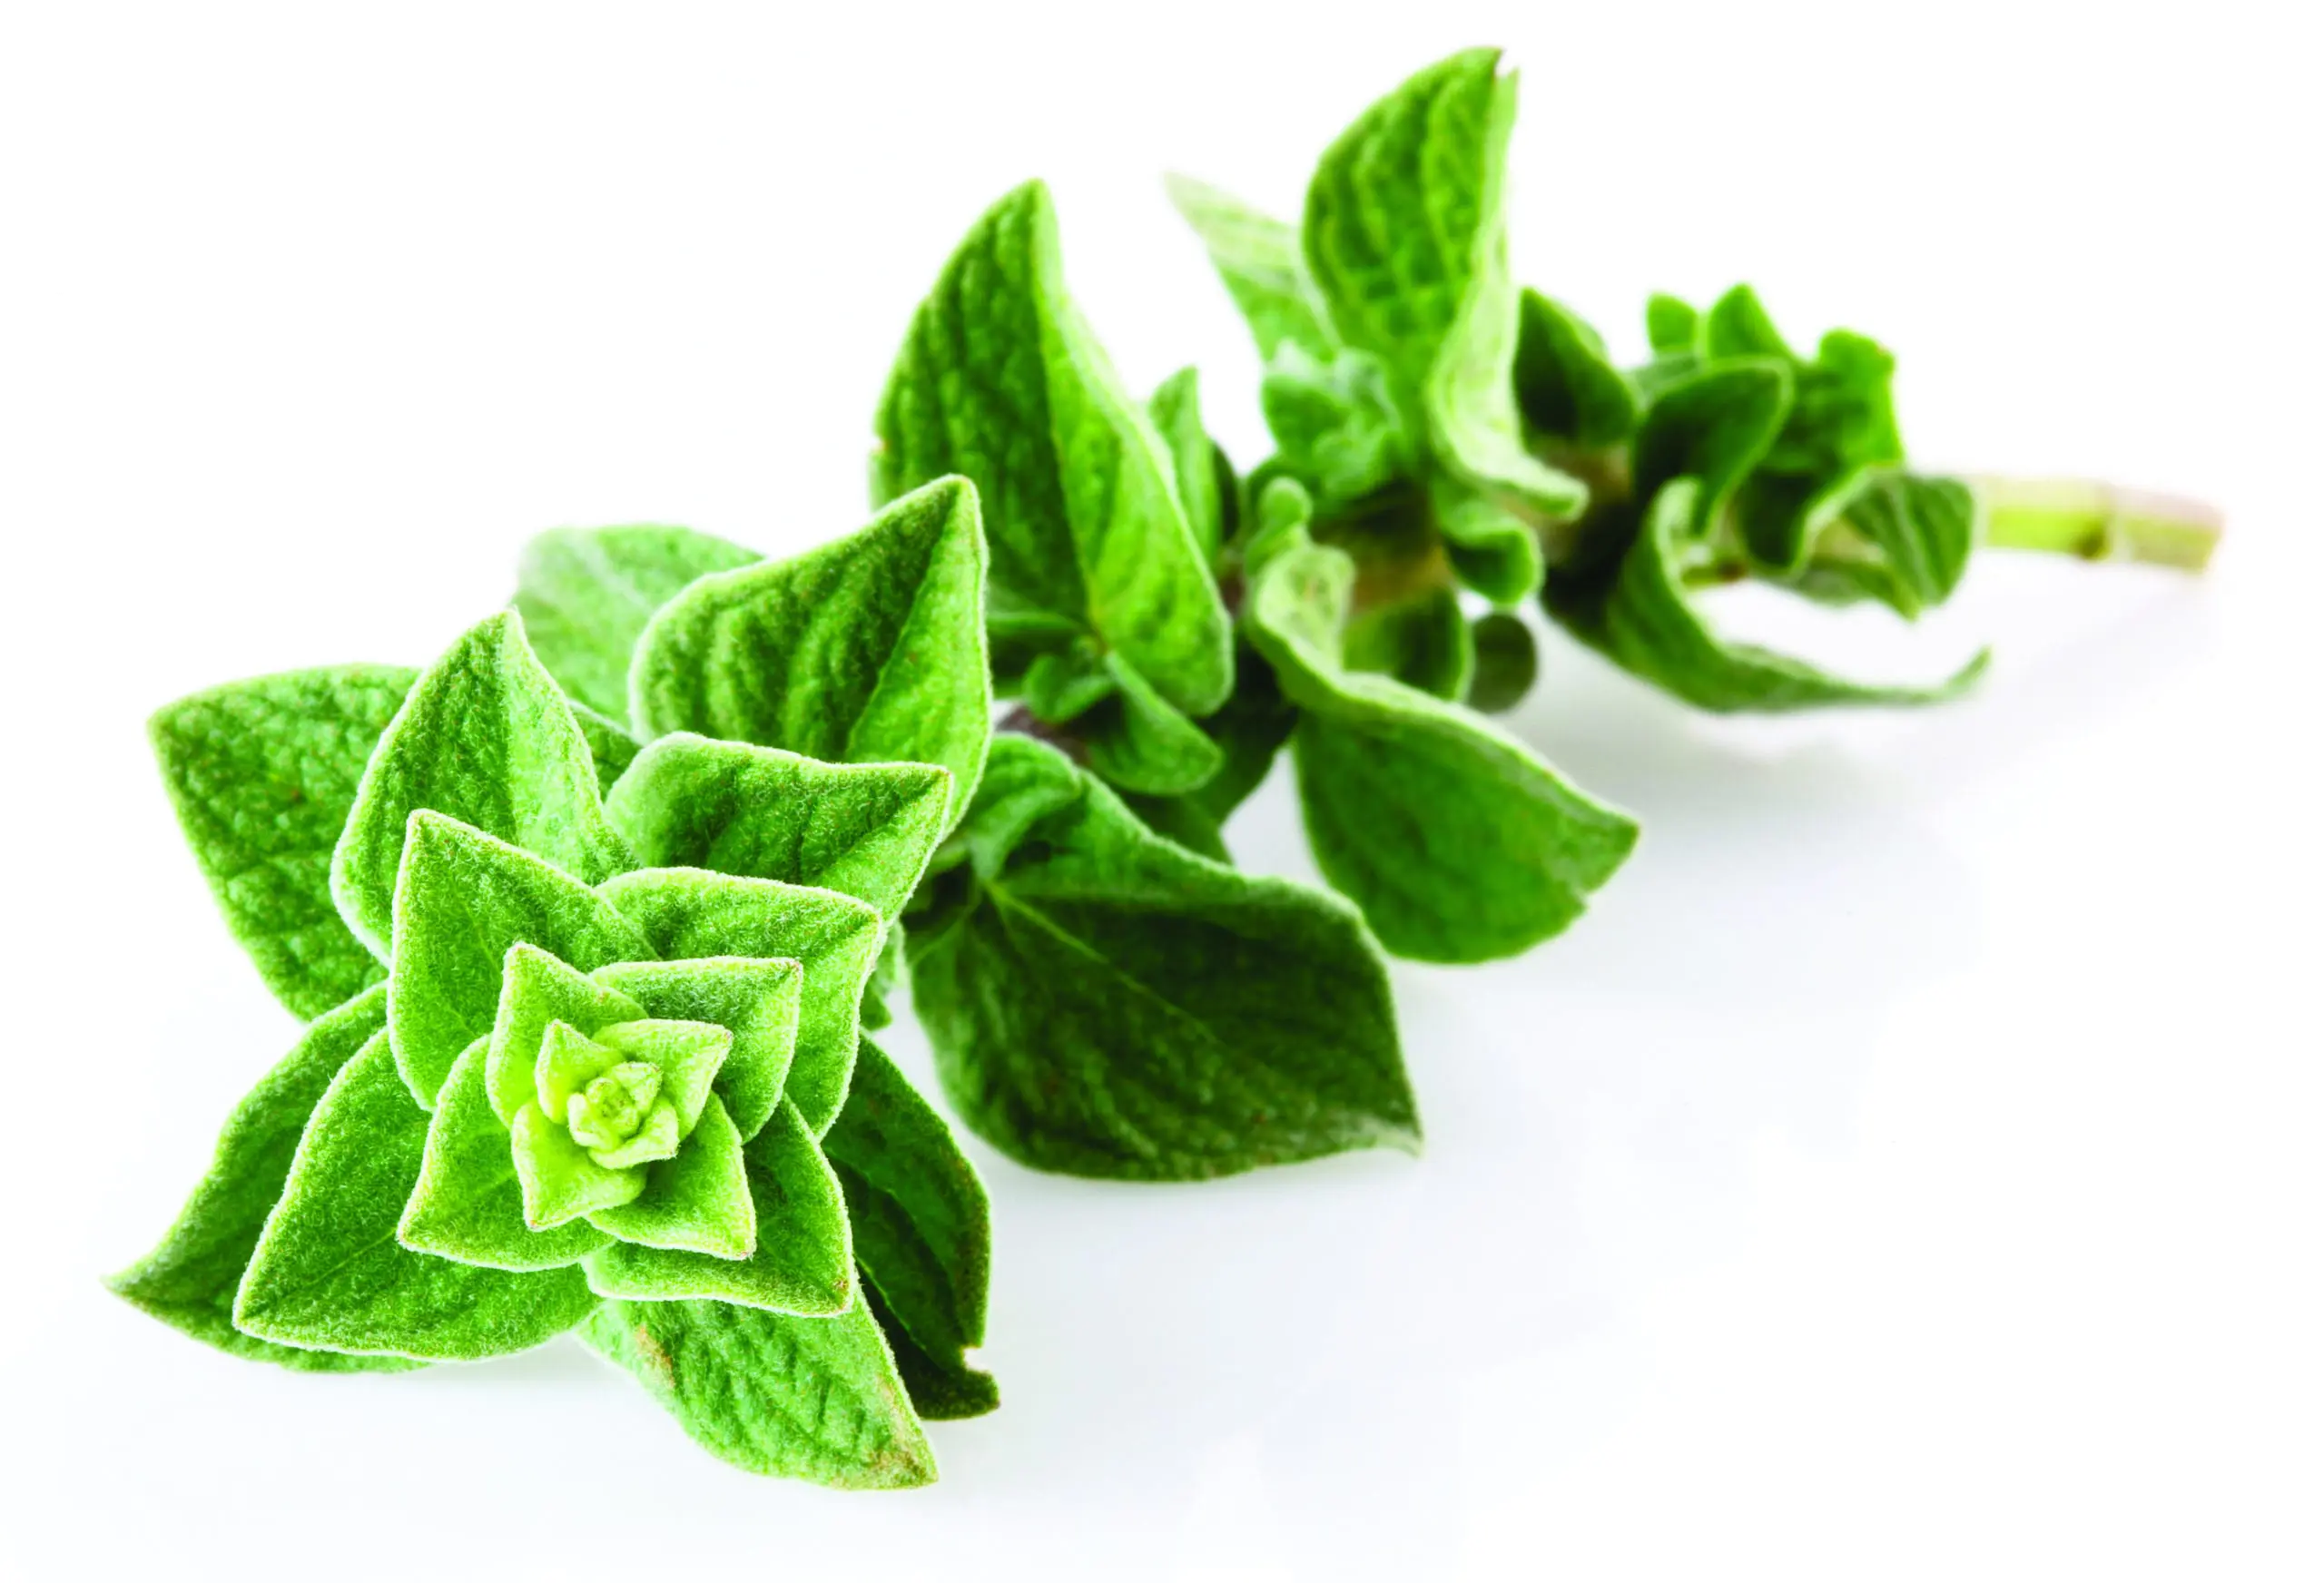 Featured image for “Oregano Oil & Other Natural Supplements”